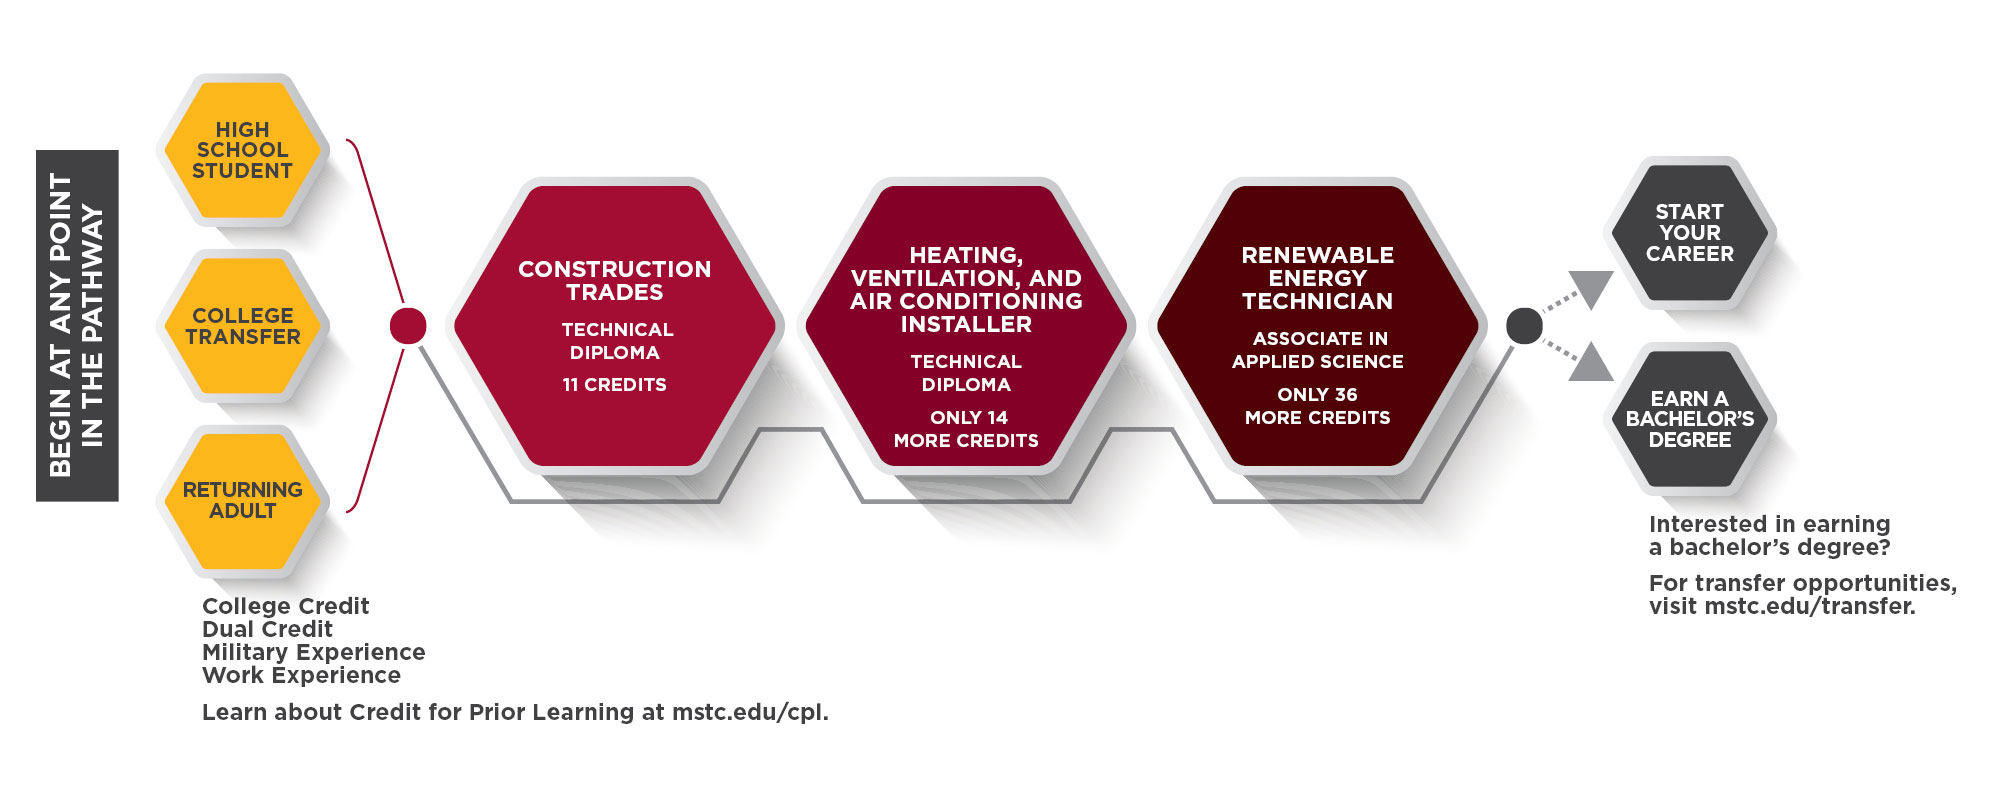 Heating-Ventilation-and-Air-Conditioning-HVAC-Pathway